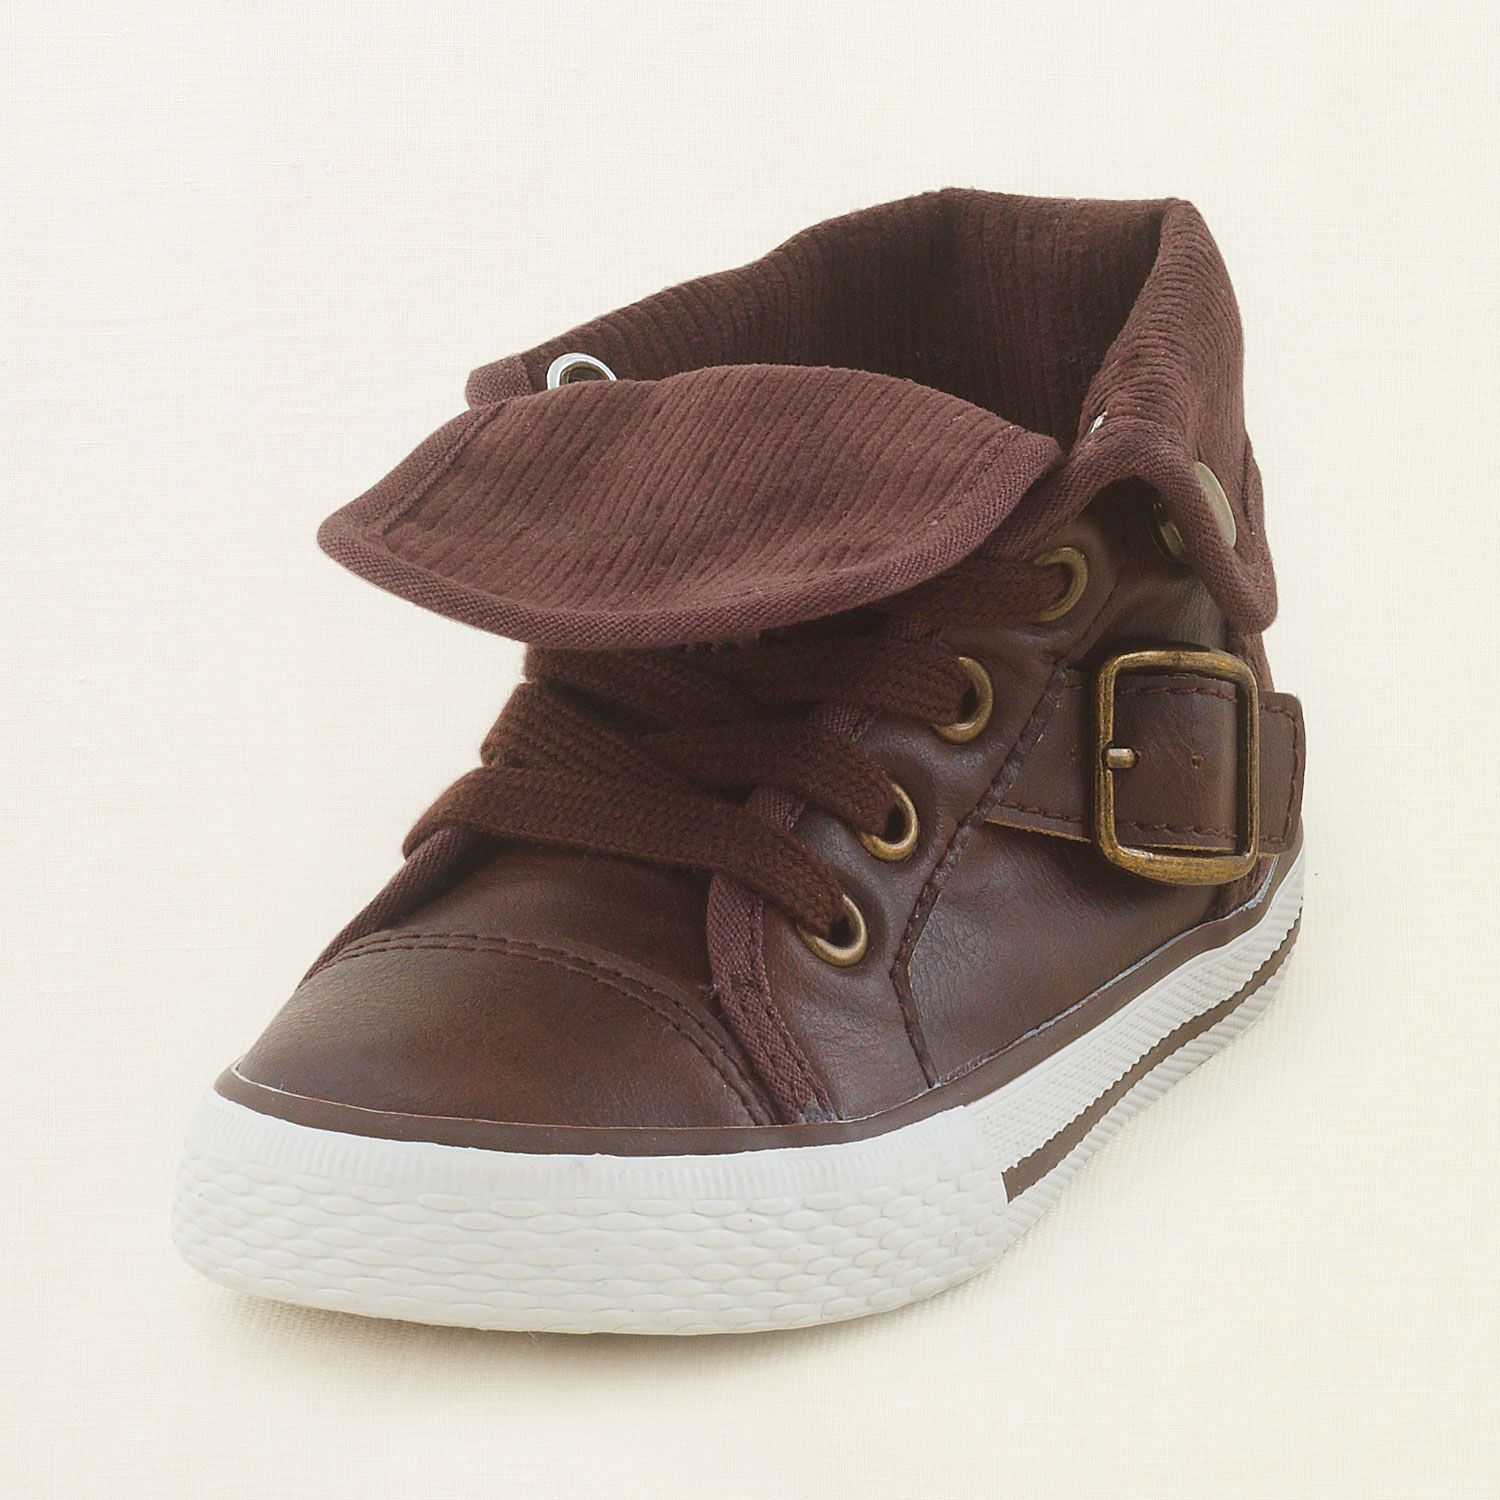 baby boy – shoes – hipster sneaker | Childrens Clothing | Kids Clothes | The Childrens Place